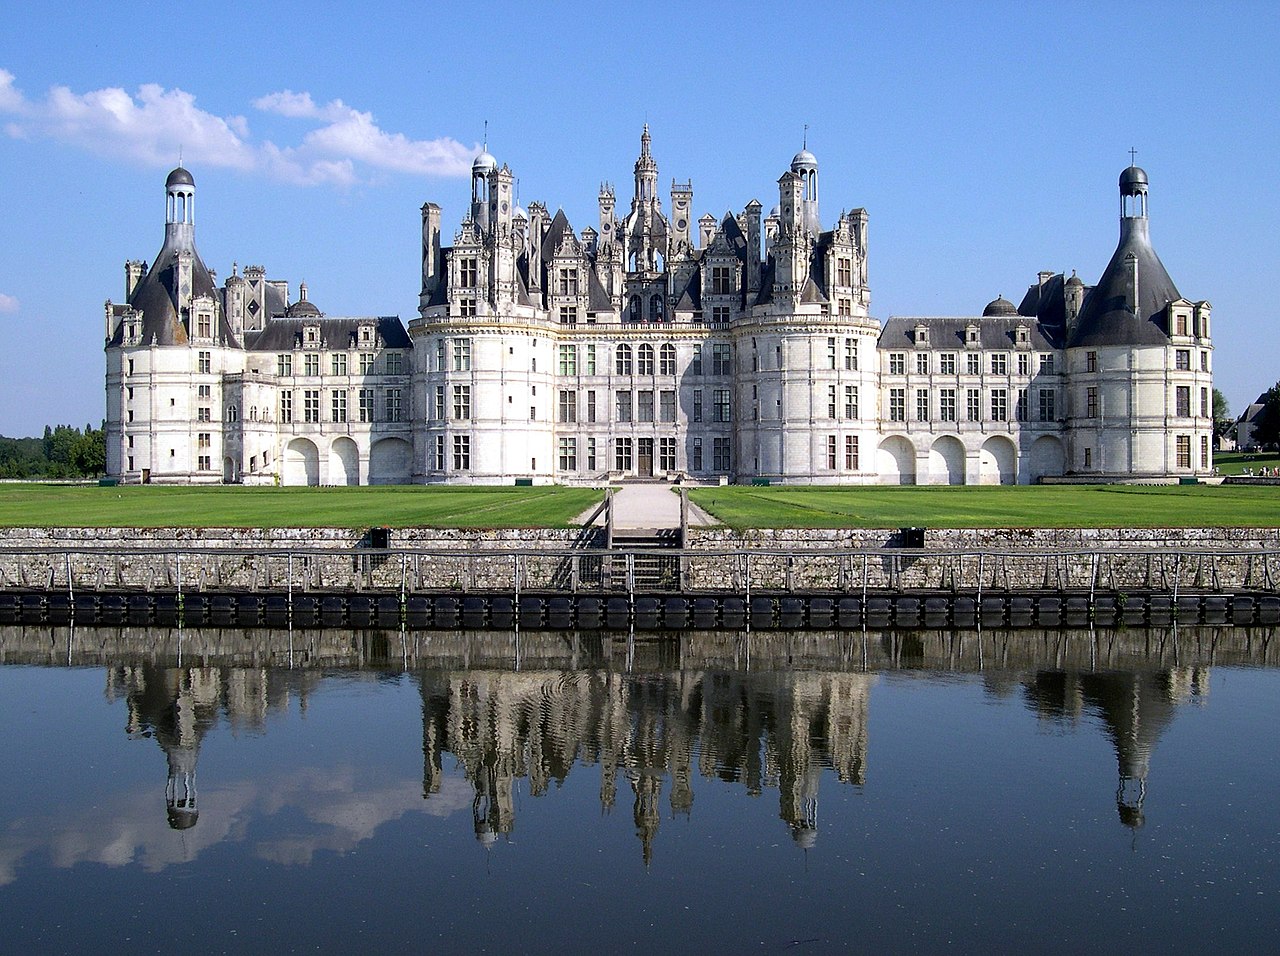 <p>In the end, King François thought the palace was too luxurious and he only stayed there a few times during his reign. </p>  <p>Now the chteau hosts different events throughout the year, so tourists can explore these magnificent halls and learn more about the history of the building.</p>